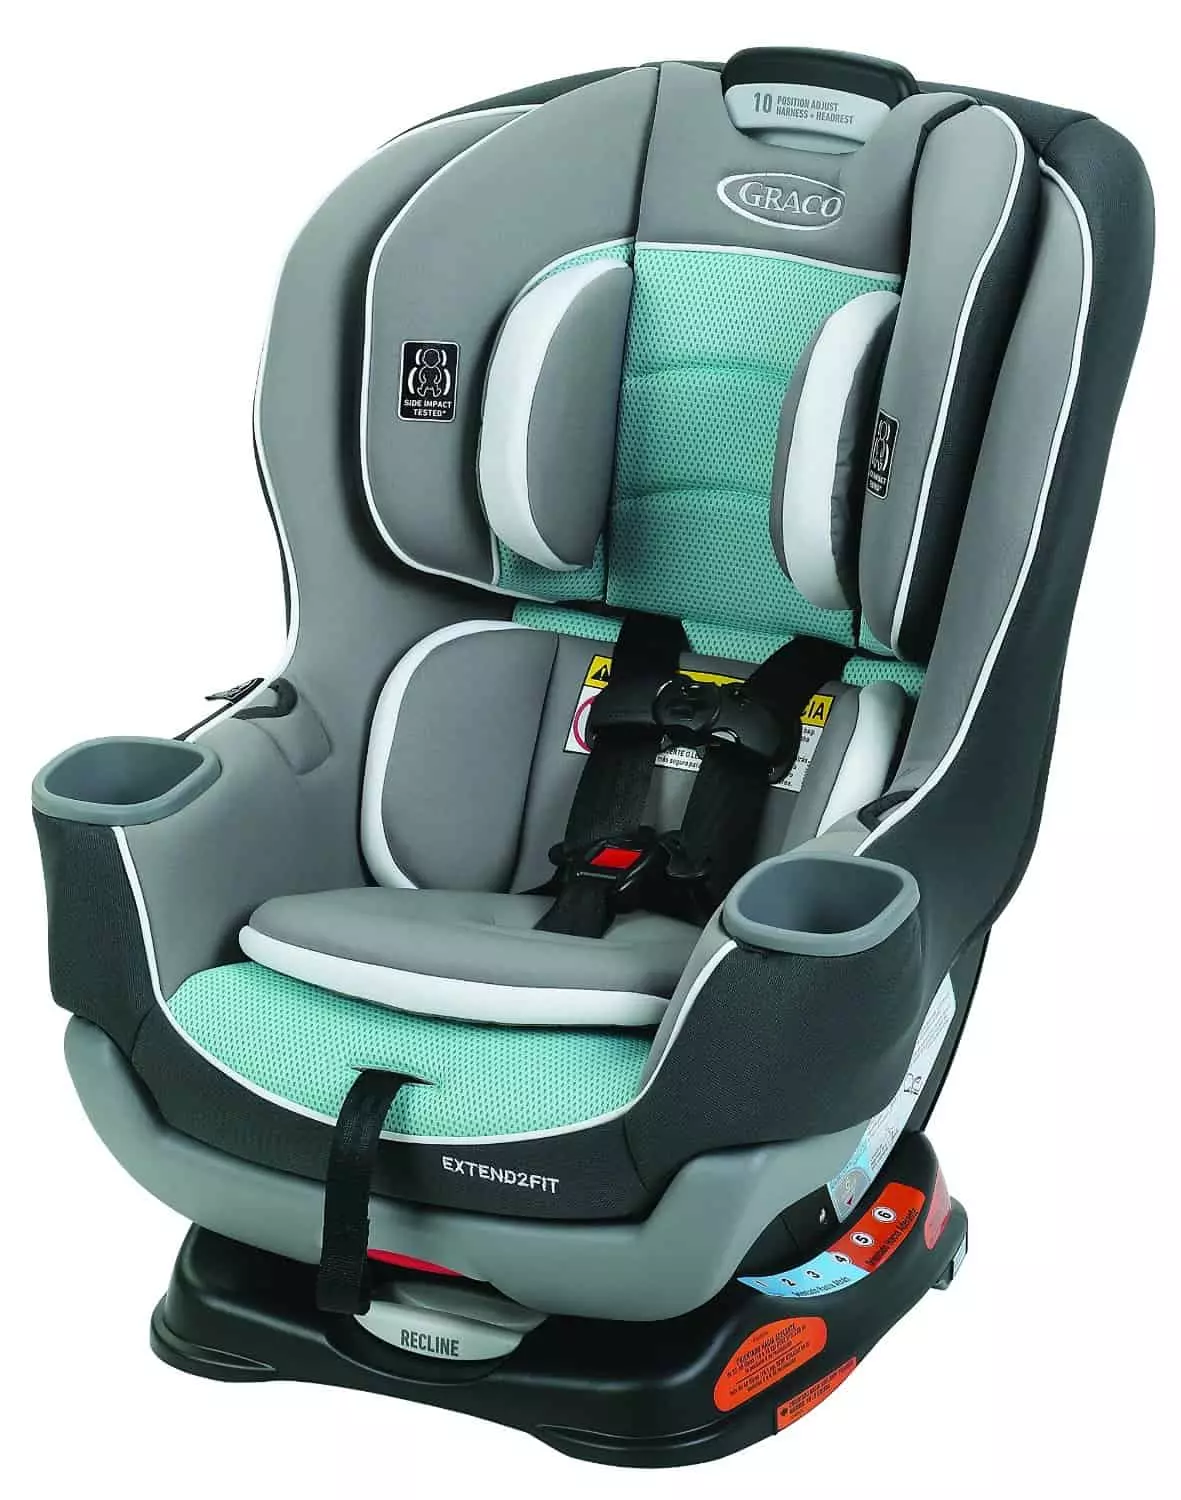 convertible-car-seat-review-graco-extend2fit-baby-bargains